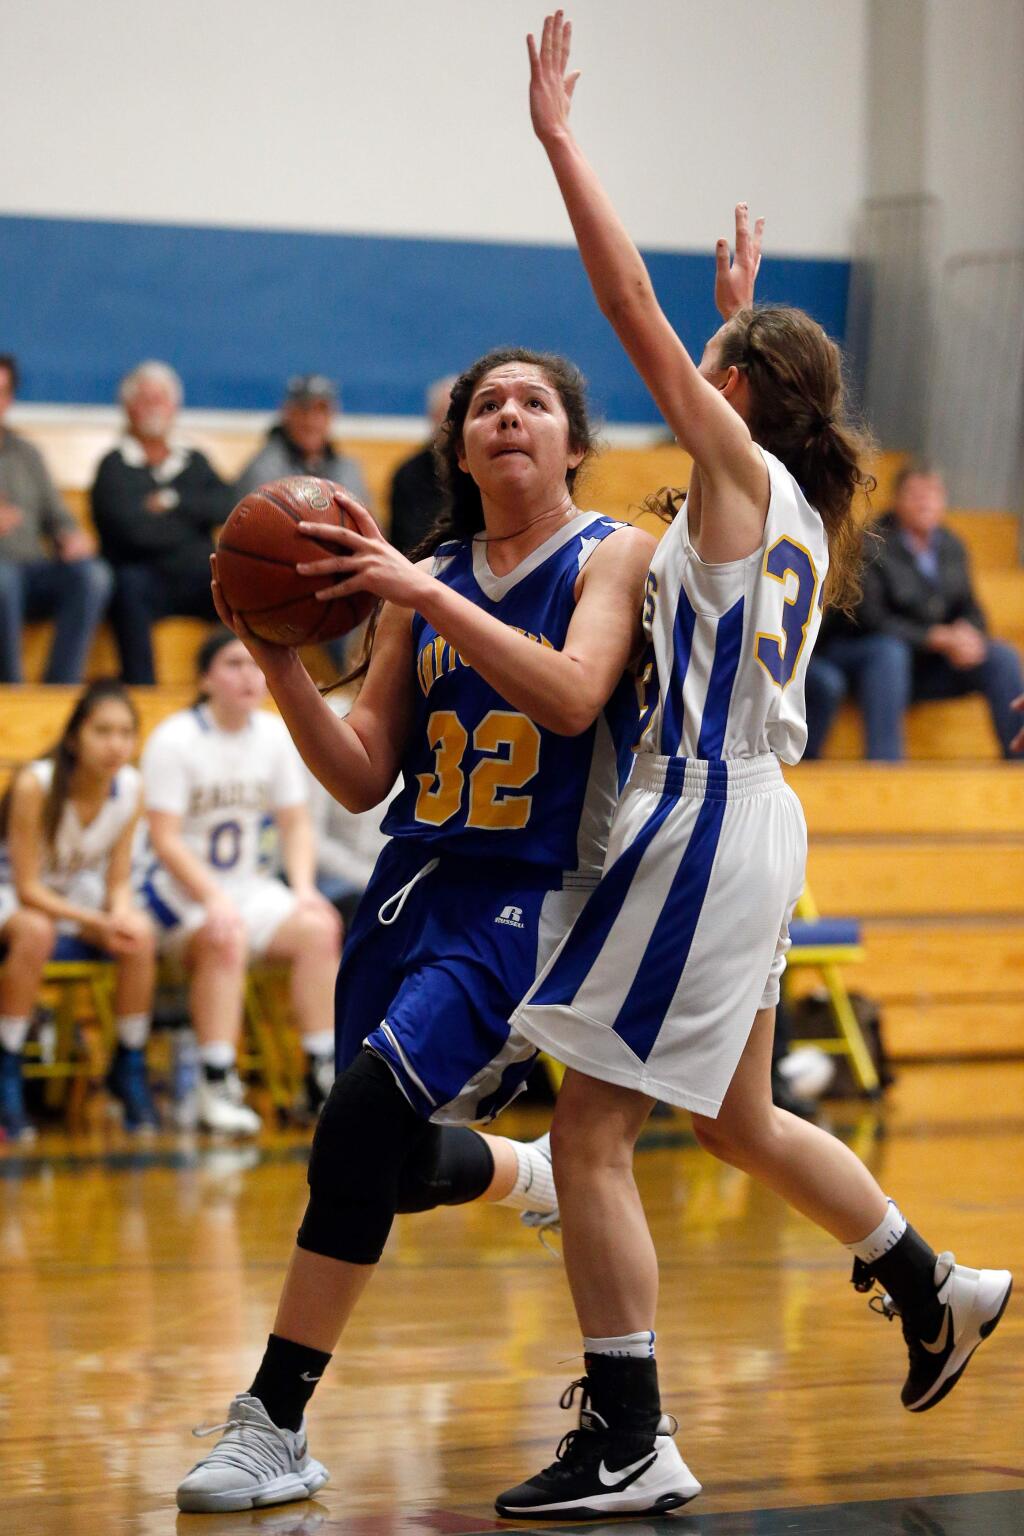 Laytonville's Akeela James, left, drives to the basket around Rincon Valley Christian's Anika Ahlstrom during the first half of the NCS Division 6 championship game in Santa Rosa on Saturday, March 3, 2018. (Alvin Jornada / The Press Democrat)